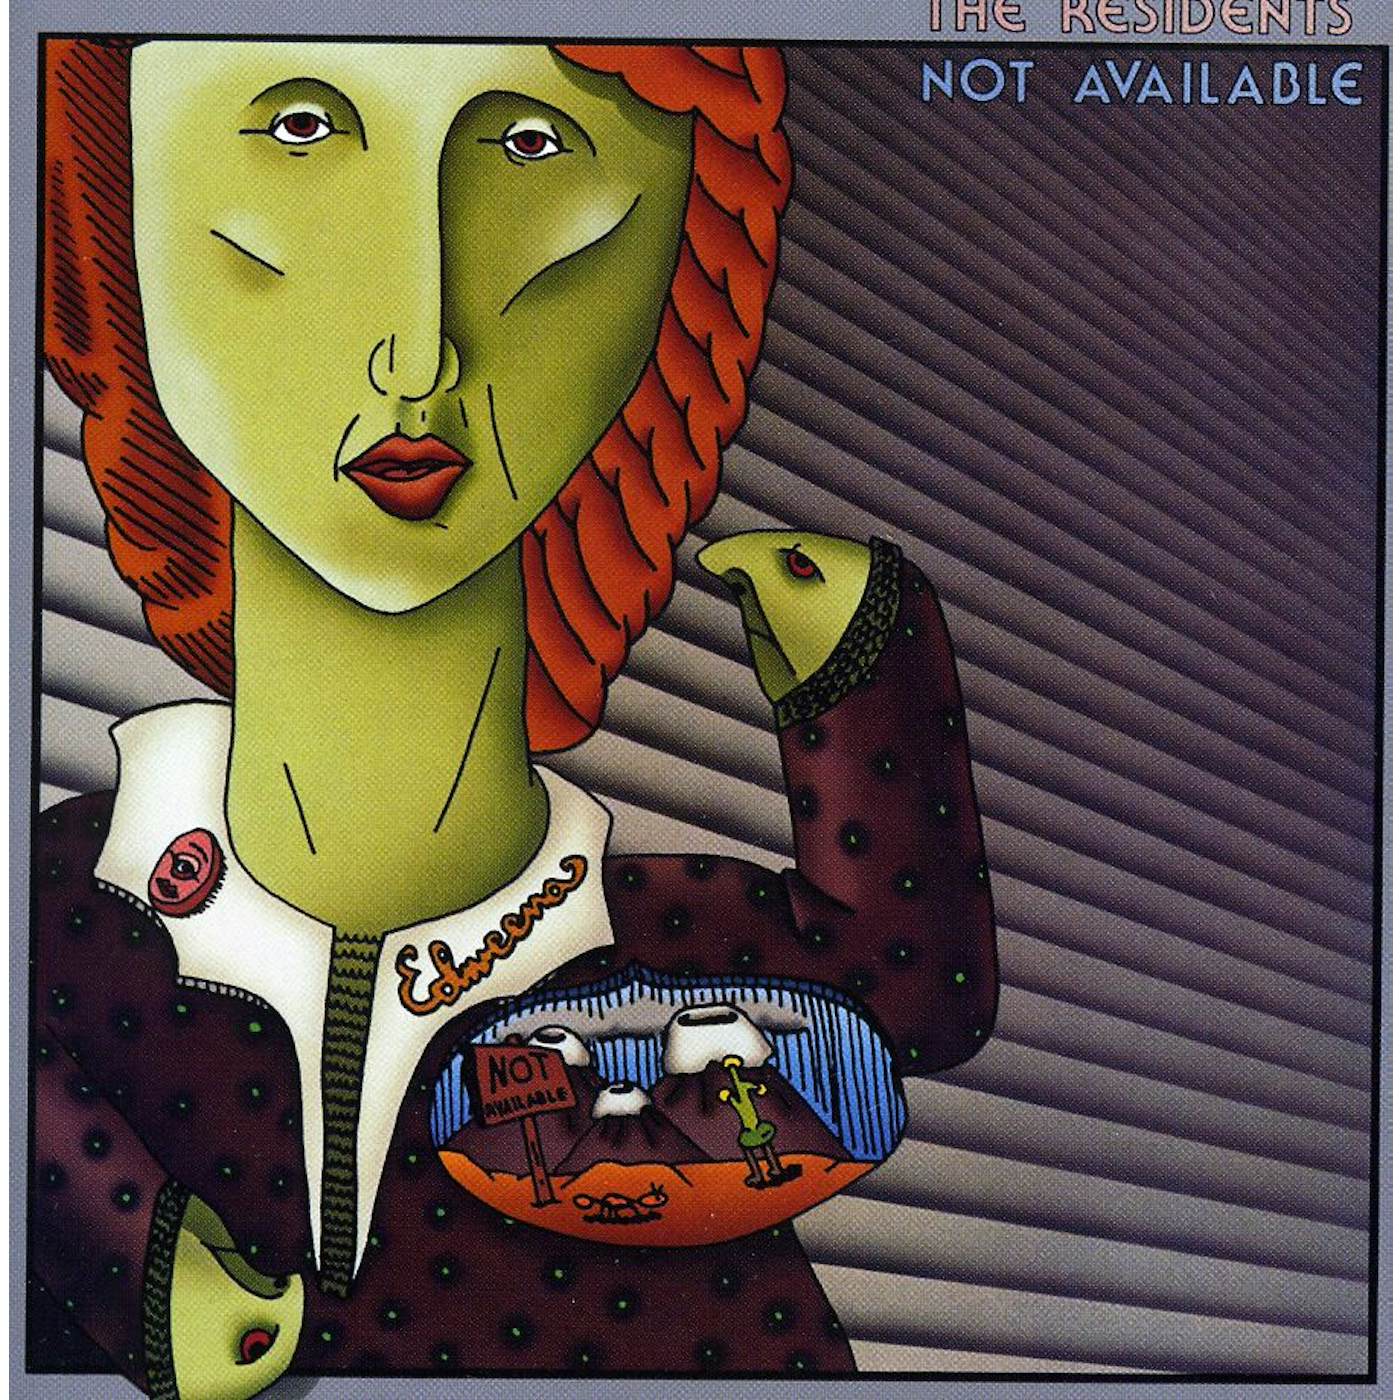 The Residents NOT AVAILABLE CD